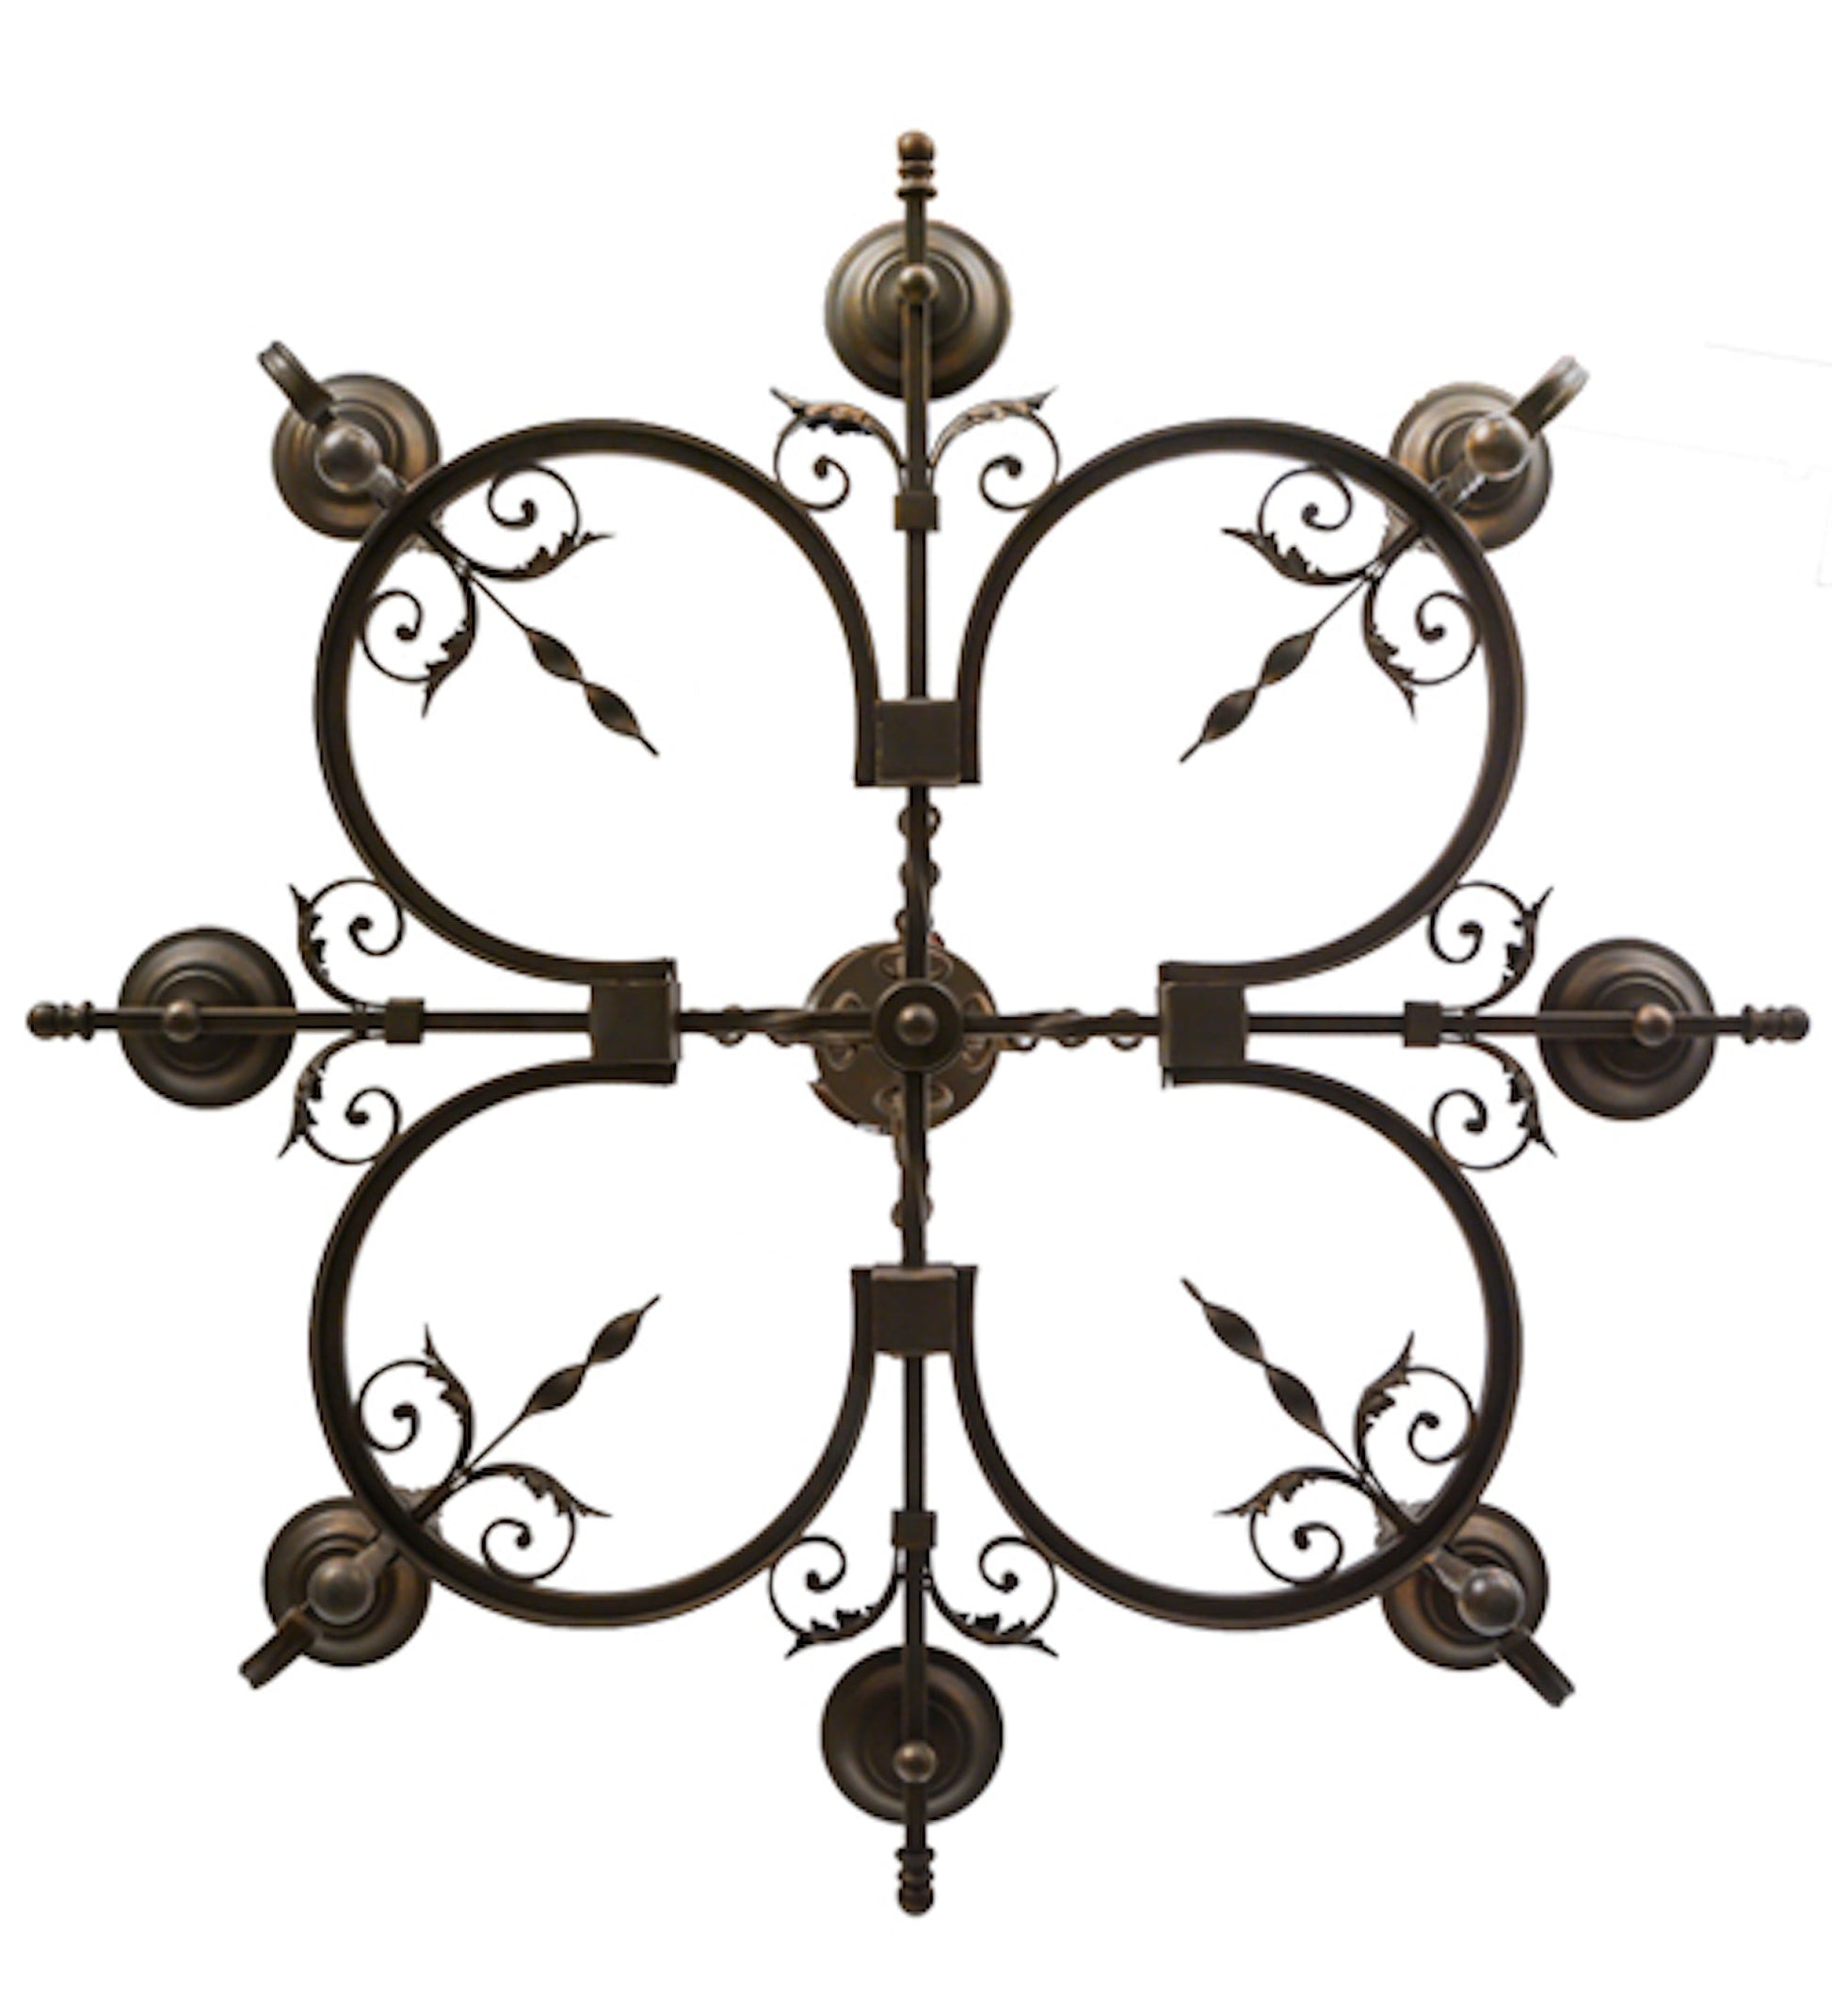 42" Andorra 8-Light Chandelier by 2nd Ave Lighting